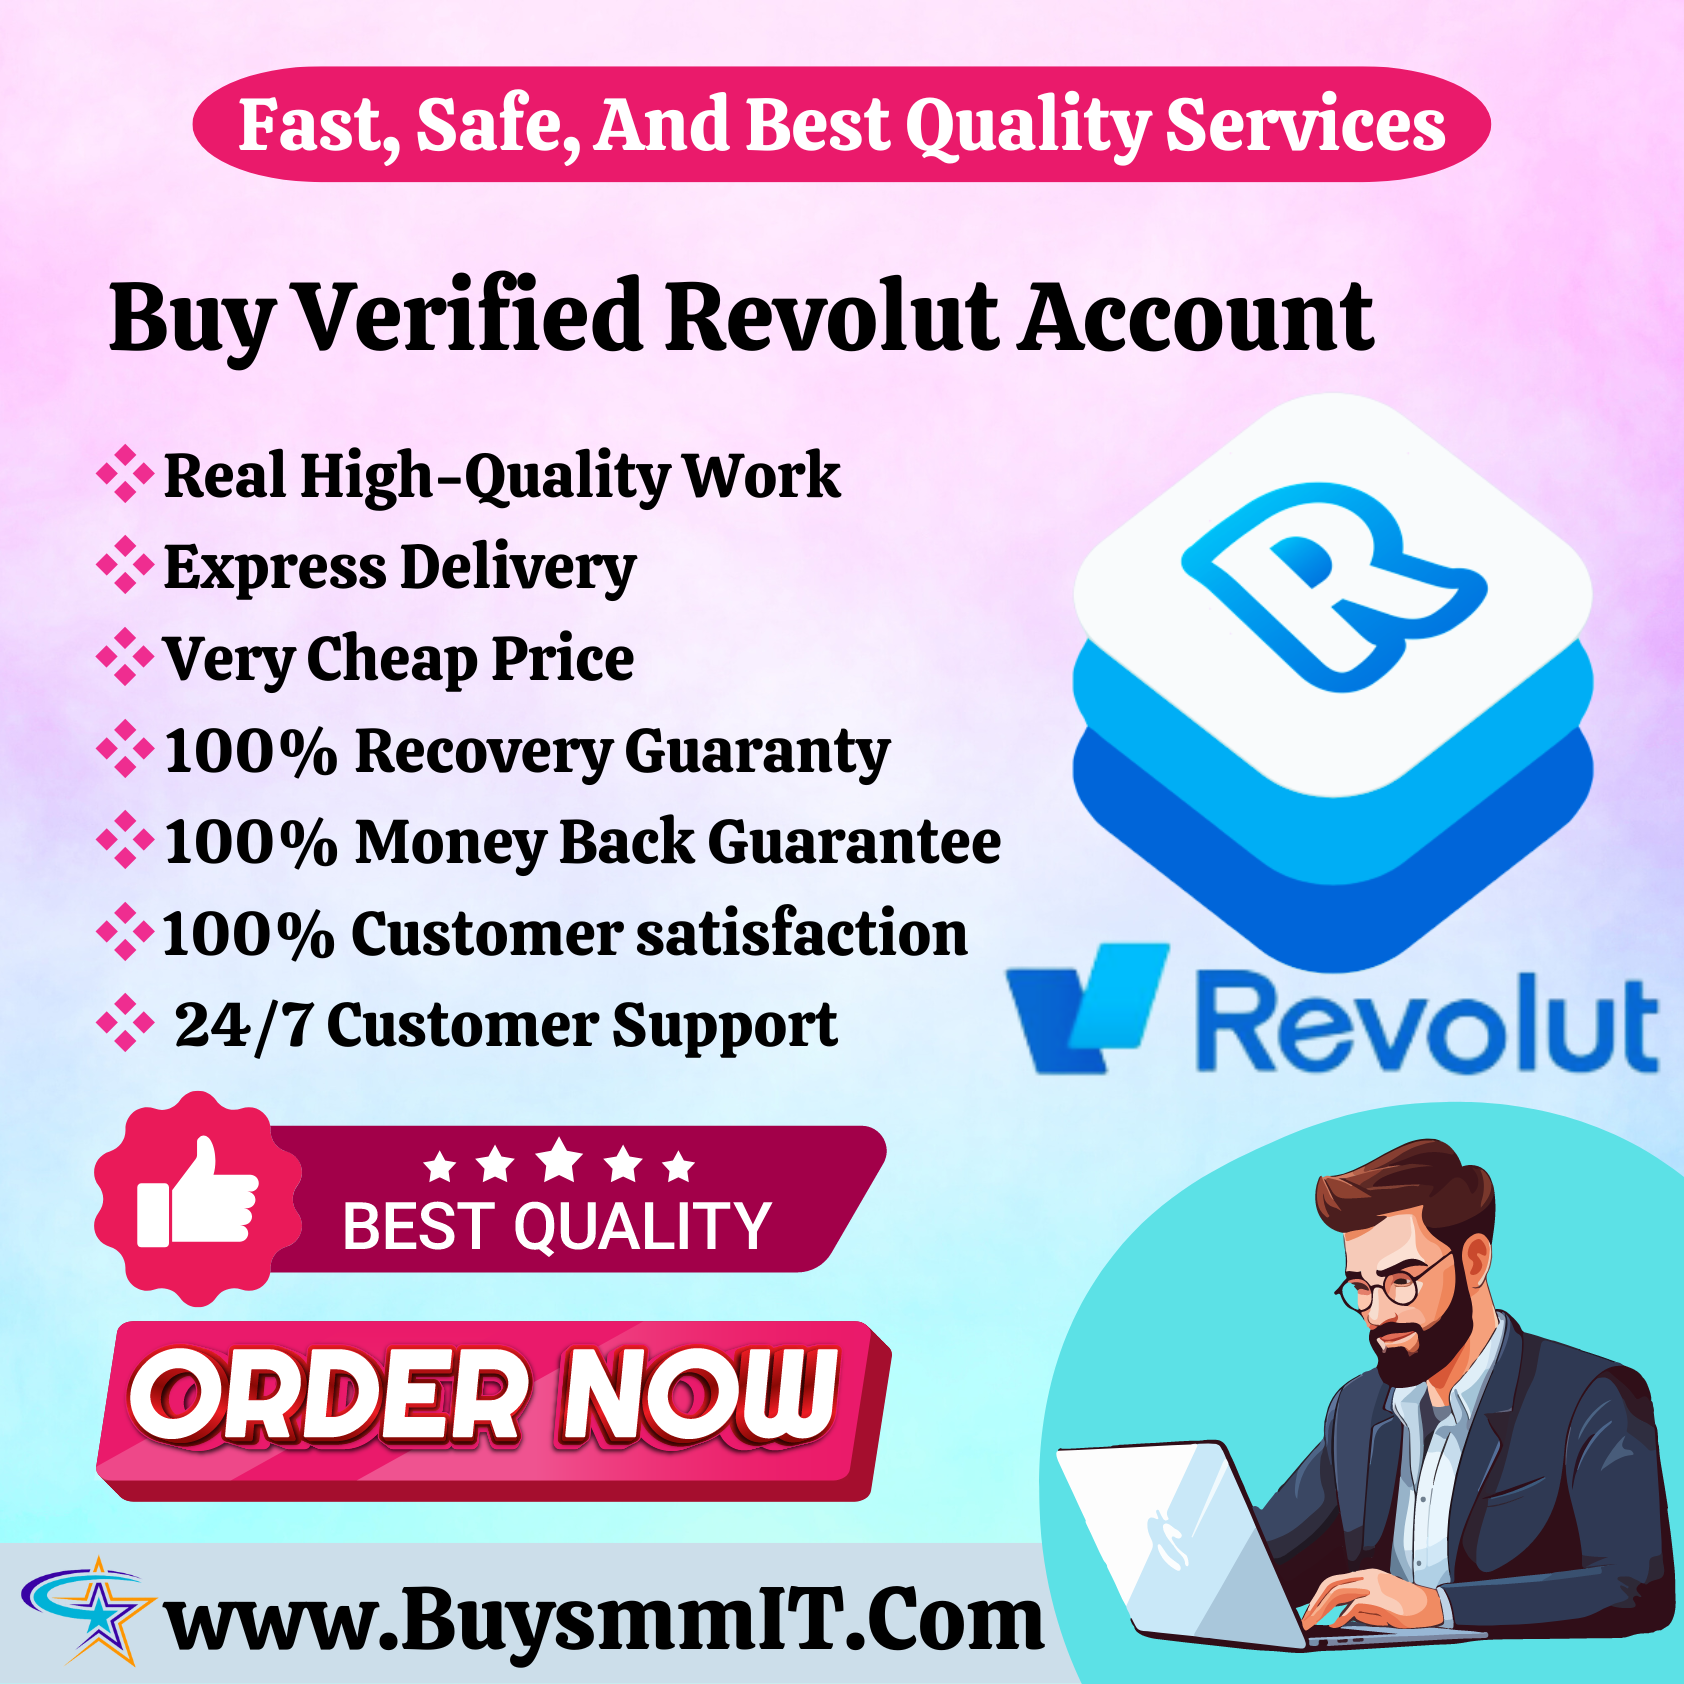 Buy Verified Revolut Account - Secure For Your Business Needs